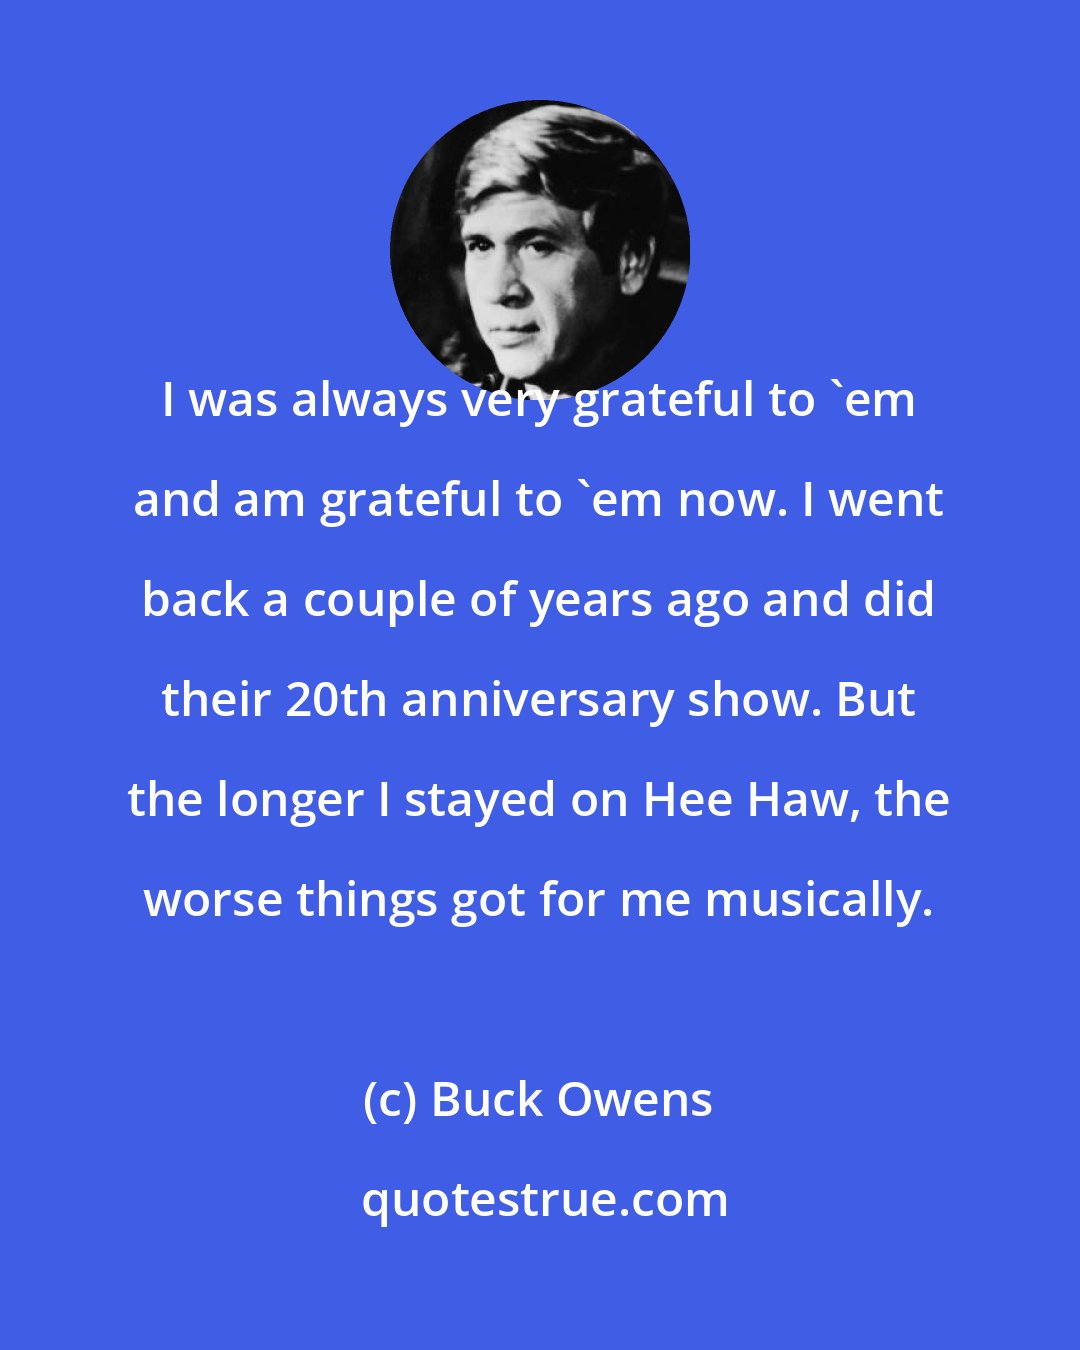 Buck Owens: I was always very grateful to 'em and am grateful to 'em now. I went back a couple of years ago and did their 20th anniversary show. But the longer I stayed on Hee Haw, the worse things got for me musically.